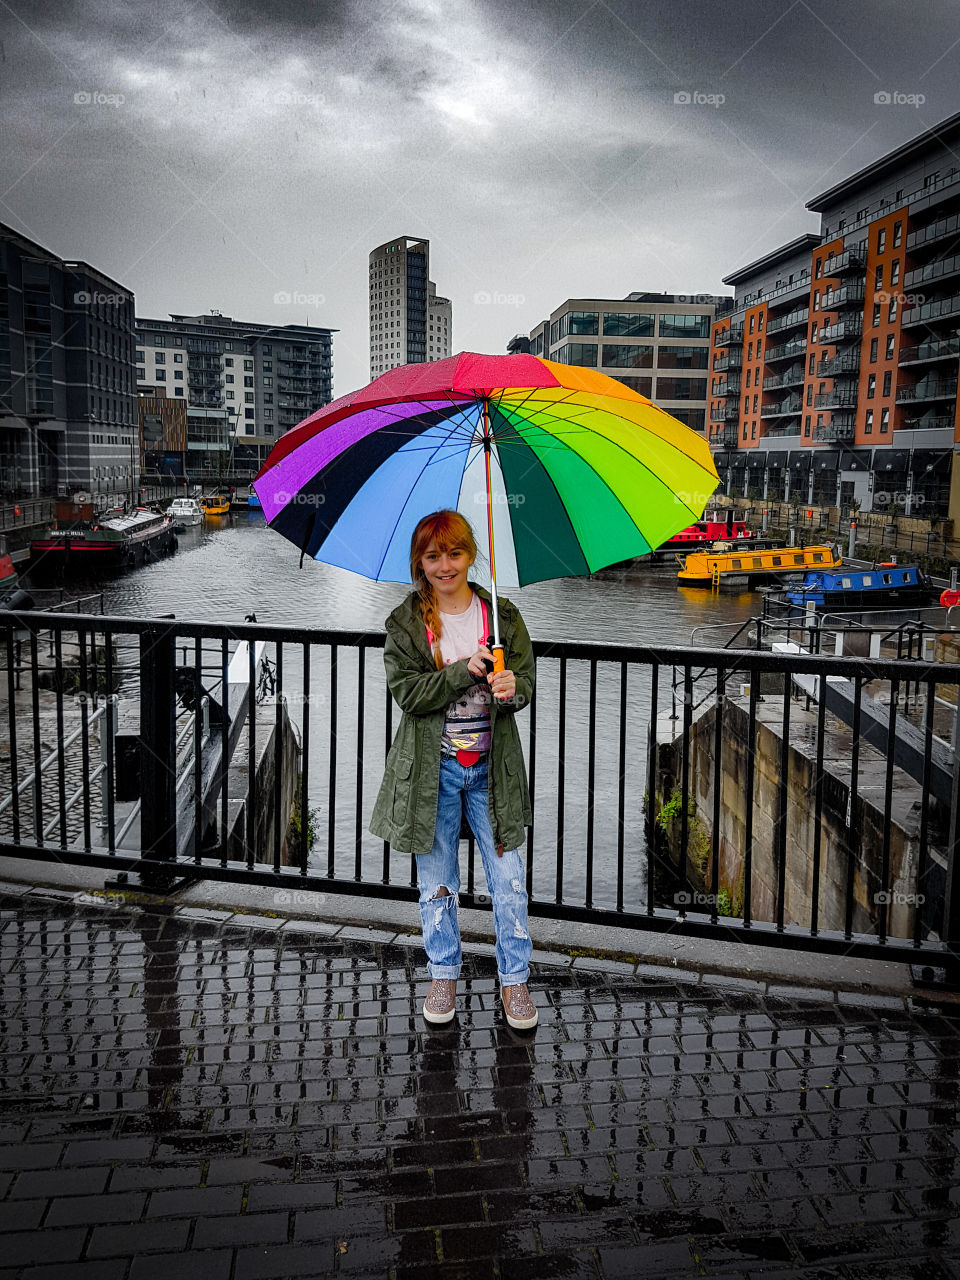 Pretty girl standing near a canal in a city, in the rain holding colourful umbrella.